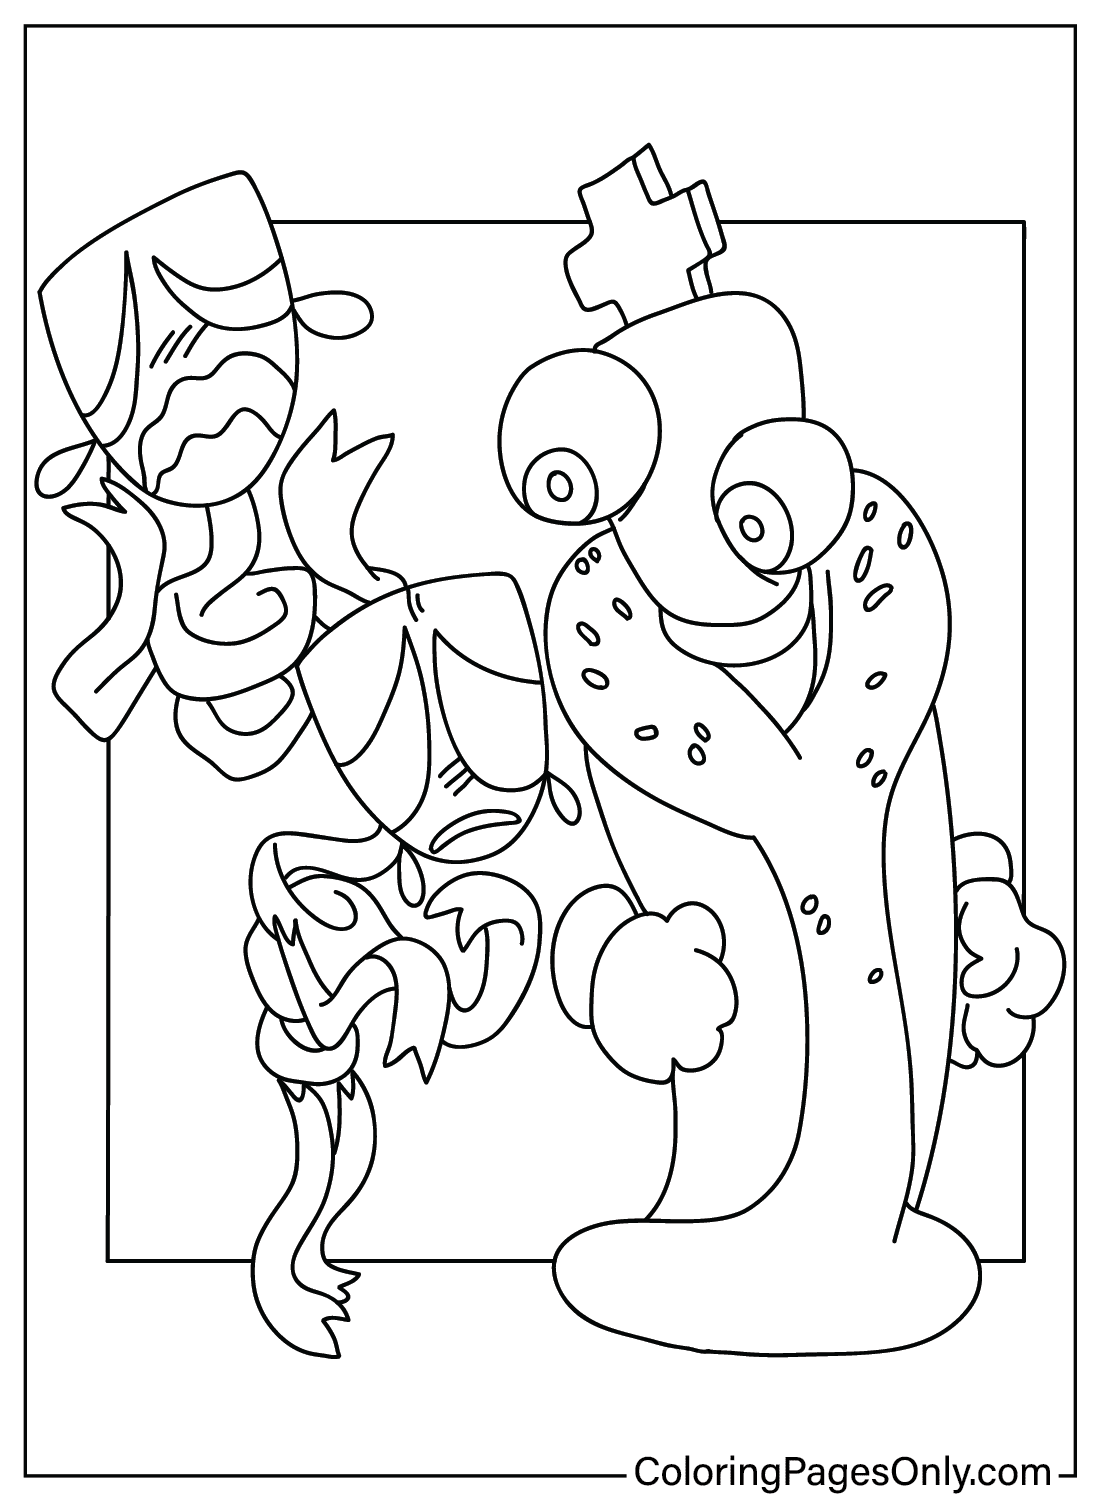 Kinger and Gangle Coloring Page from The Amazing Digital Circus